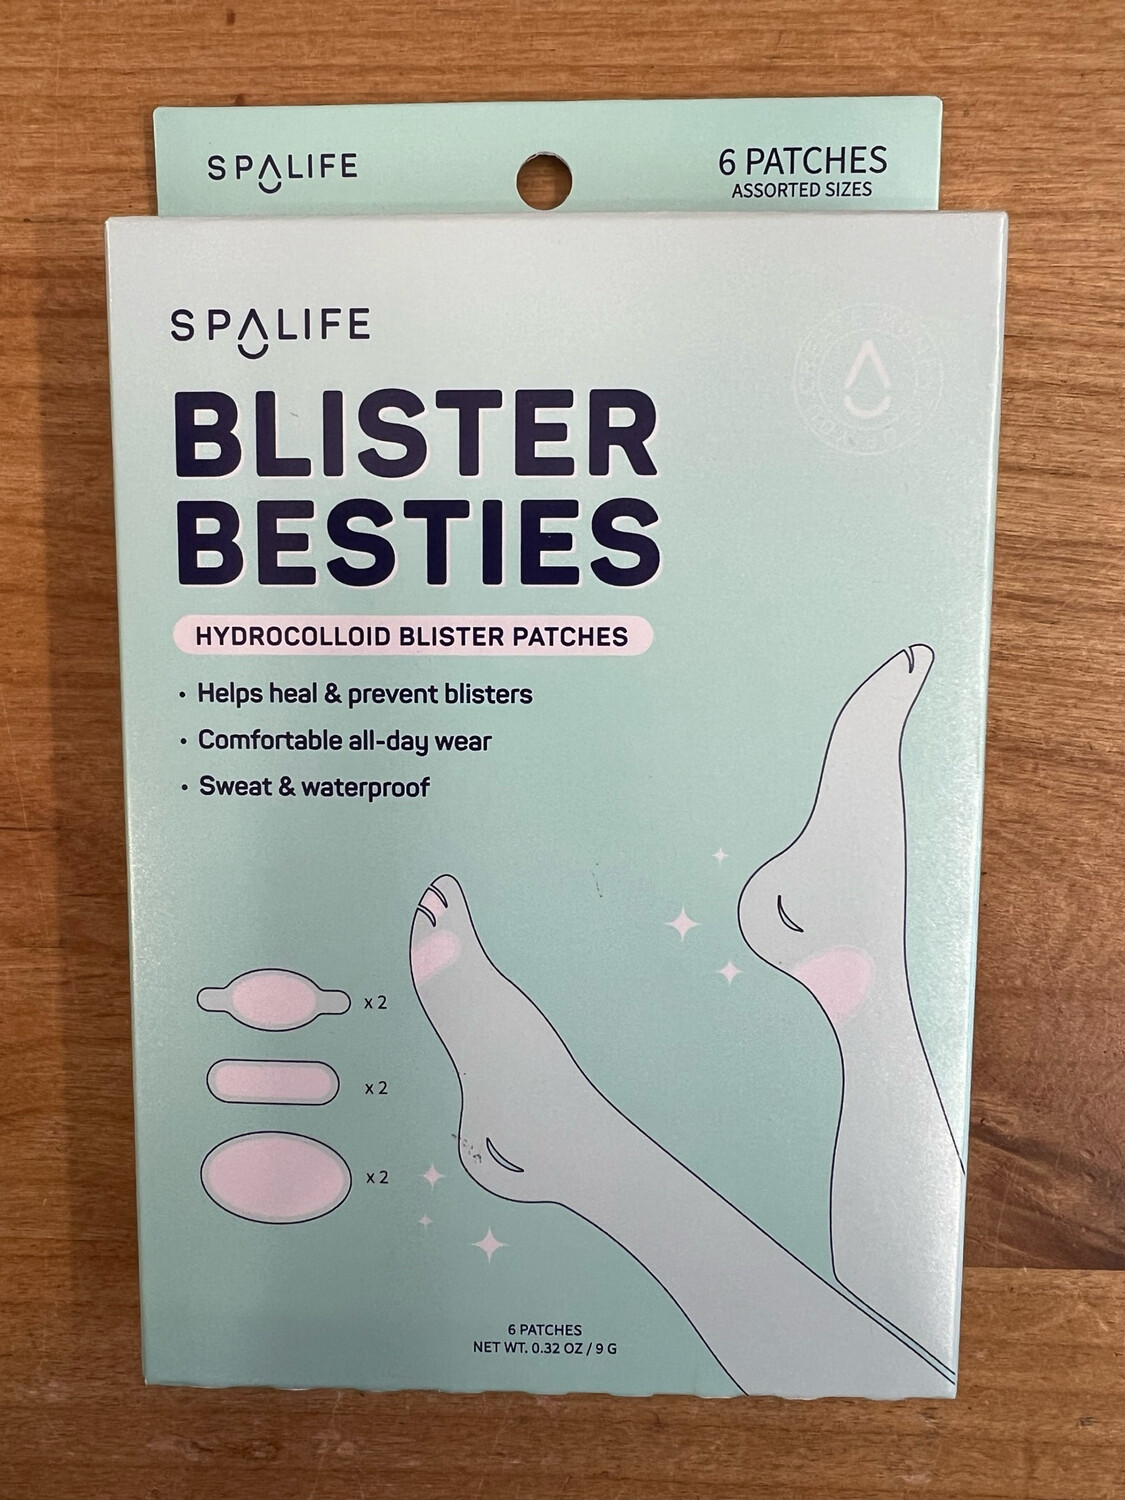 Blister Besties Patches